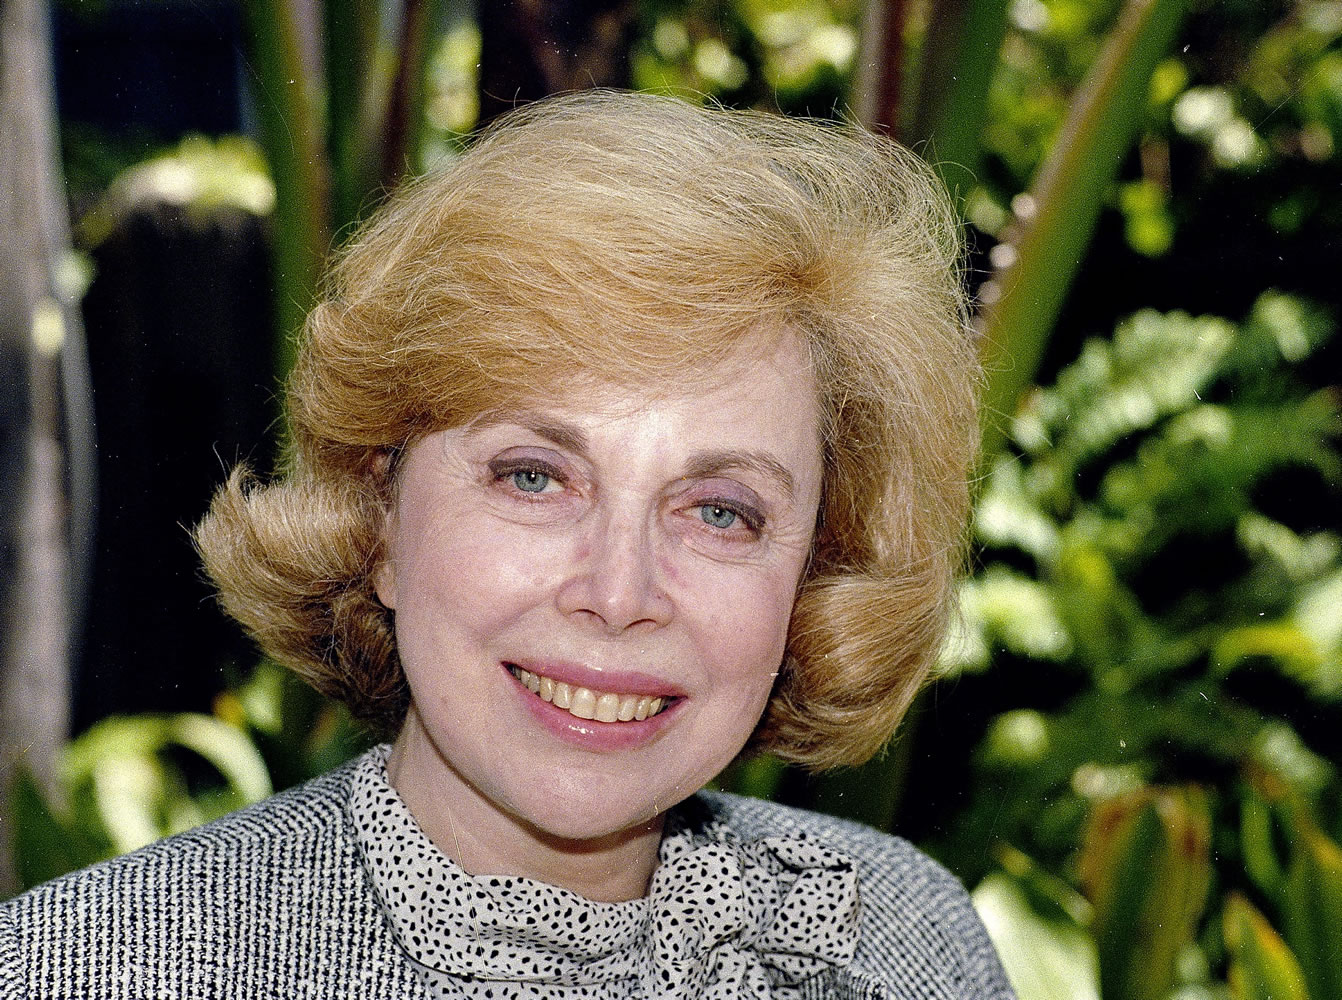 Associated Press files
Joyce Brothers, seen here on Sept. 1, 1987, died Monday in New York City, according to publicist Sanford Brokaw. She was 85.